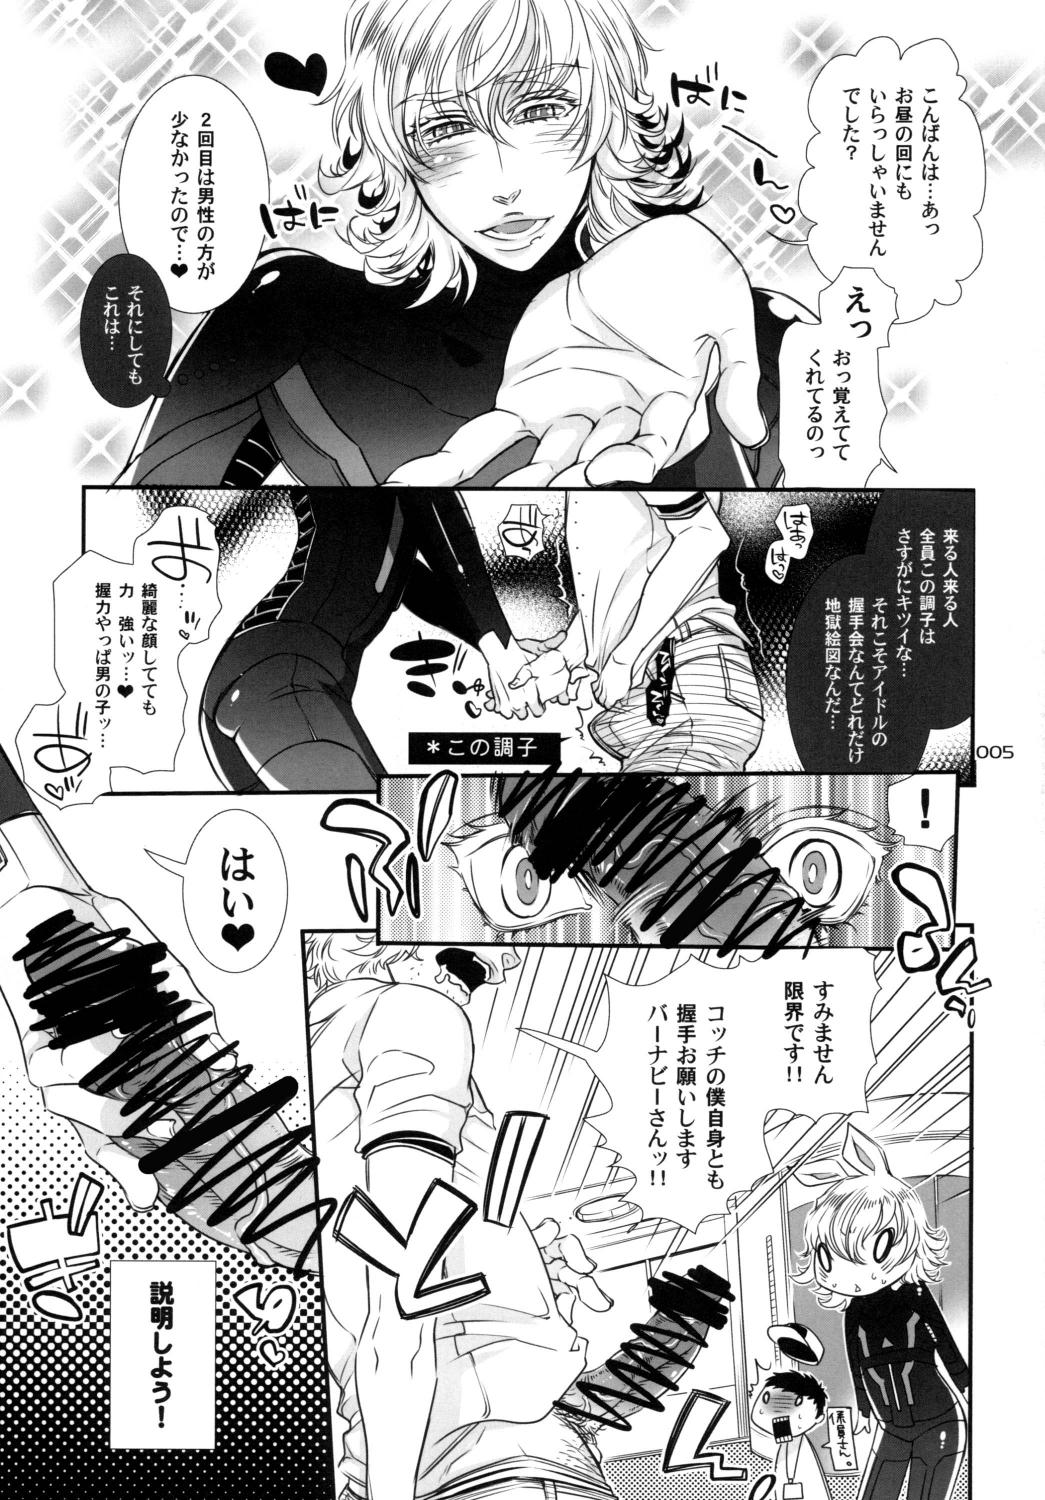 Massage バ○ト69で僕と握手! - Tiger and bunny Amateurs - Page 5